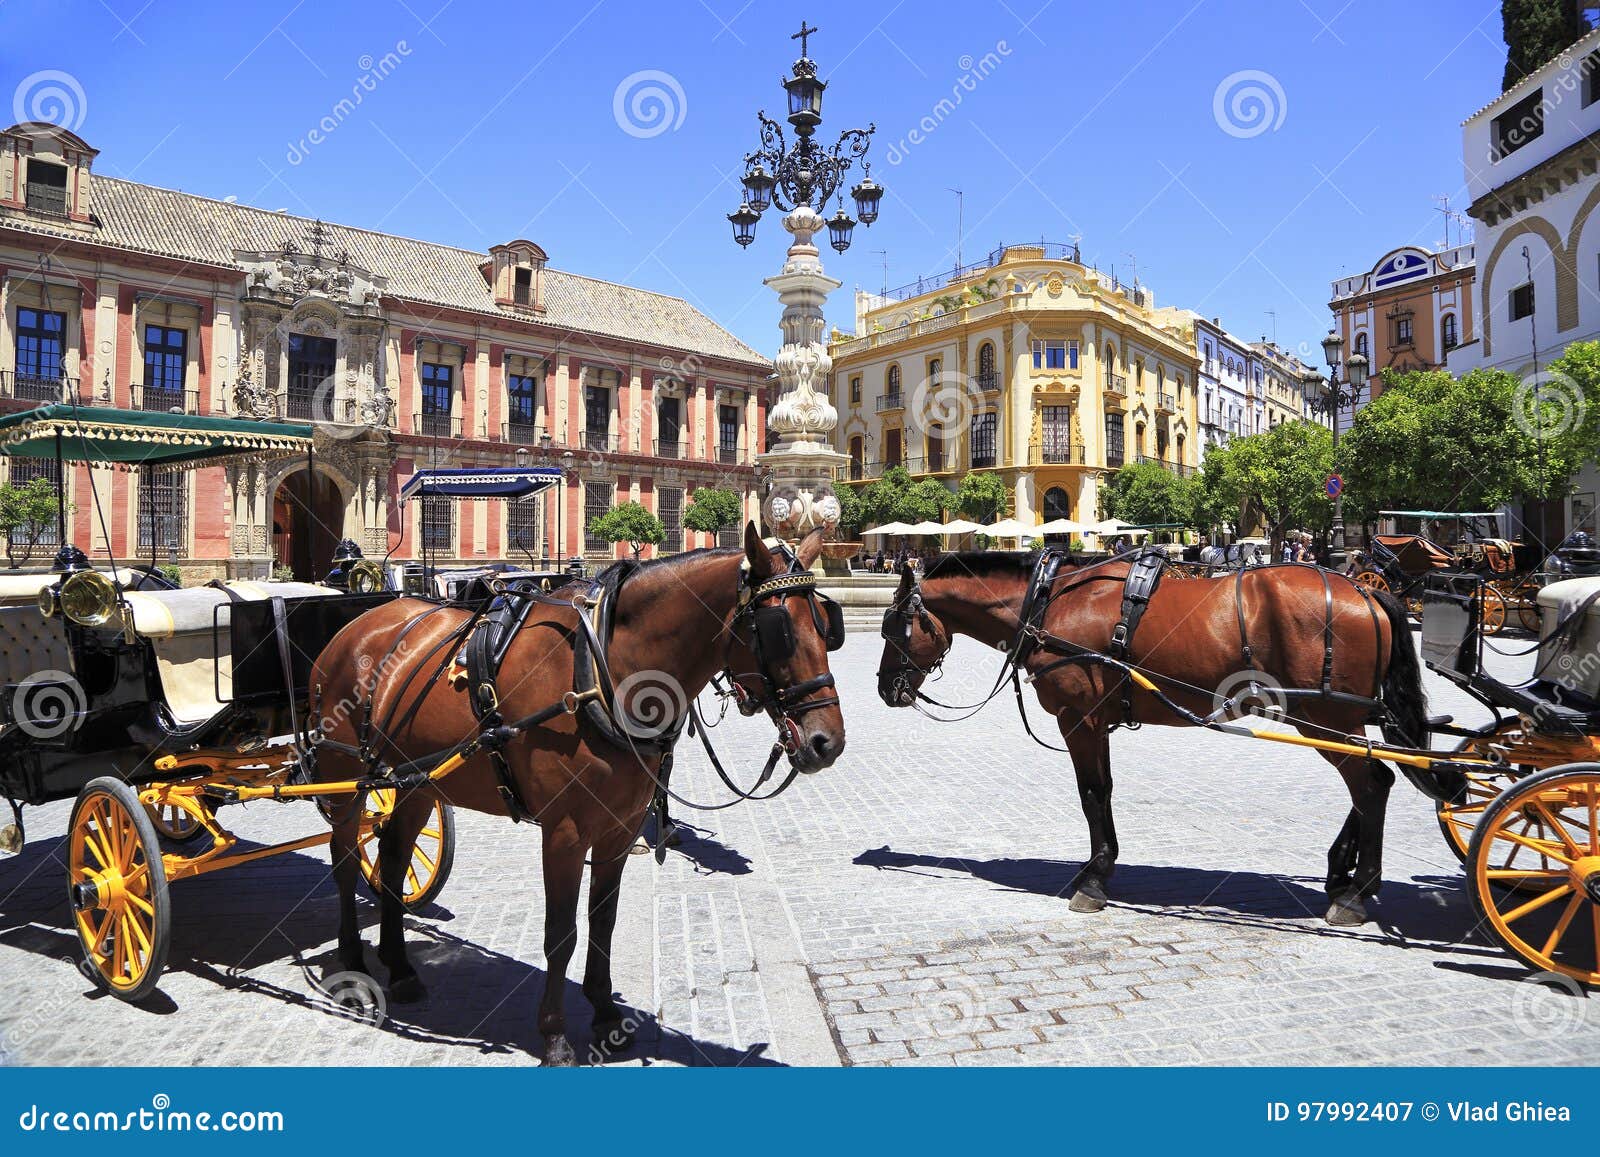 seville plaza with carriages and horses on the foreground